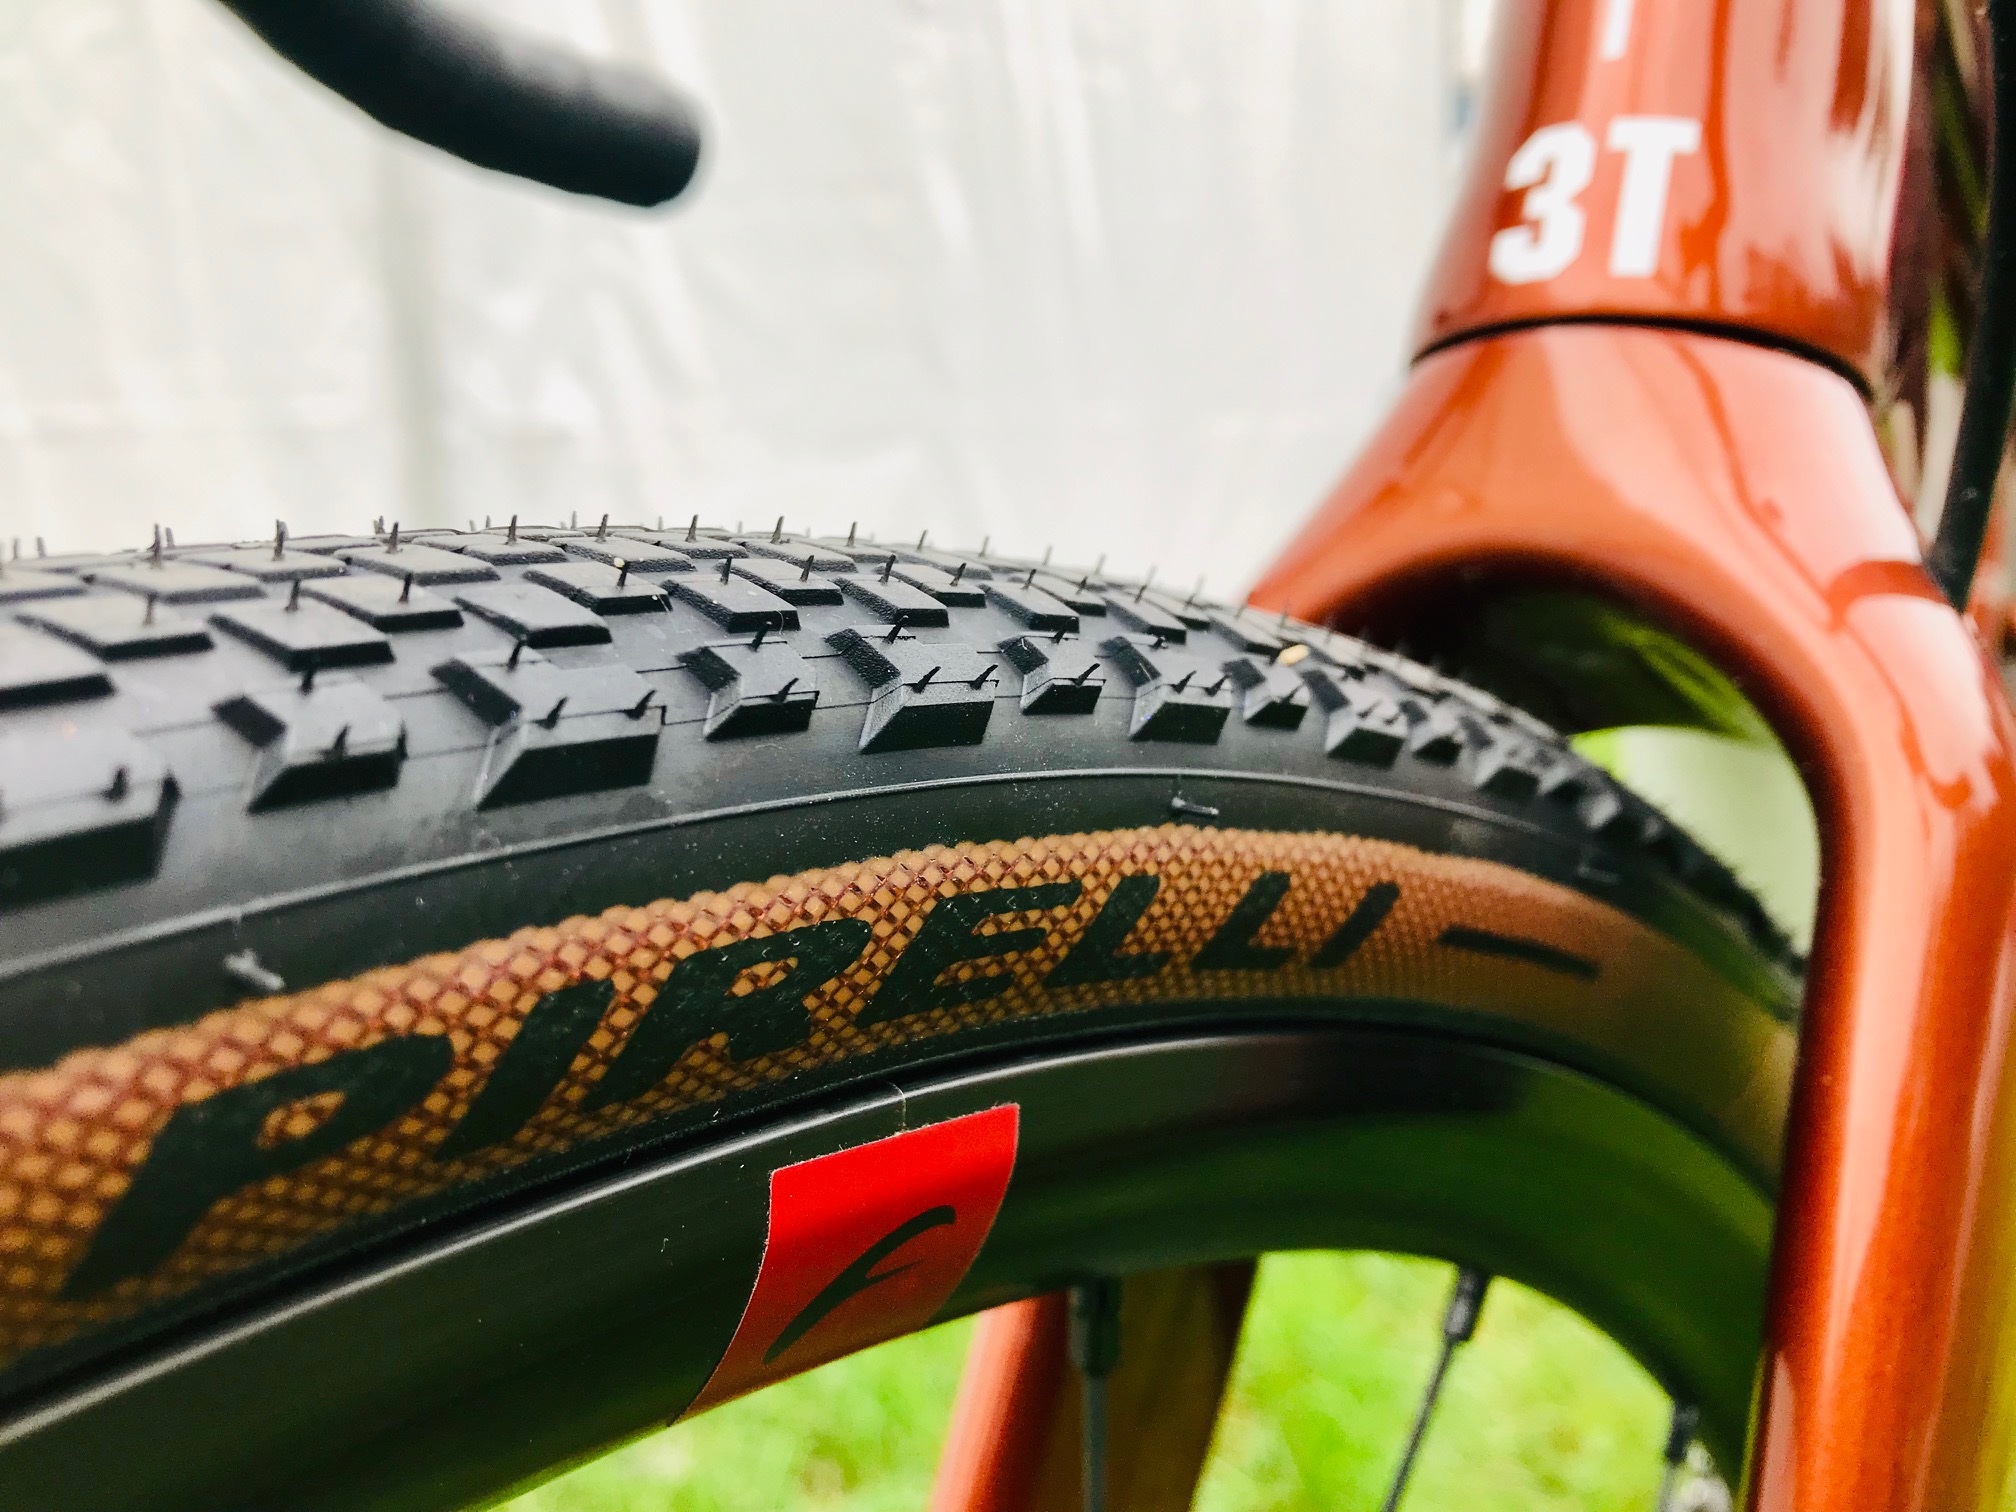 Pirelli partners w/ Jeroboam Gravel Challenge 2019, gives first look at tan wall Cinturato tires